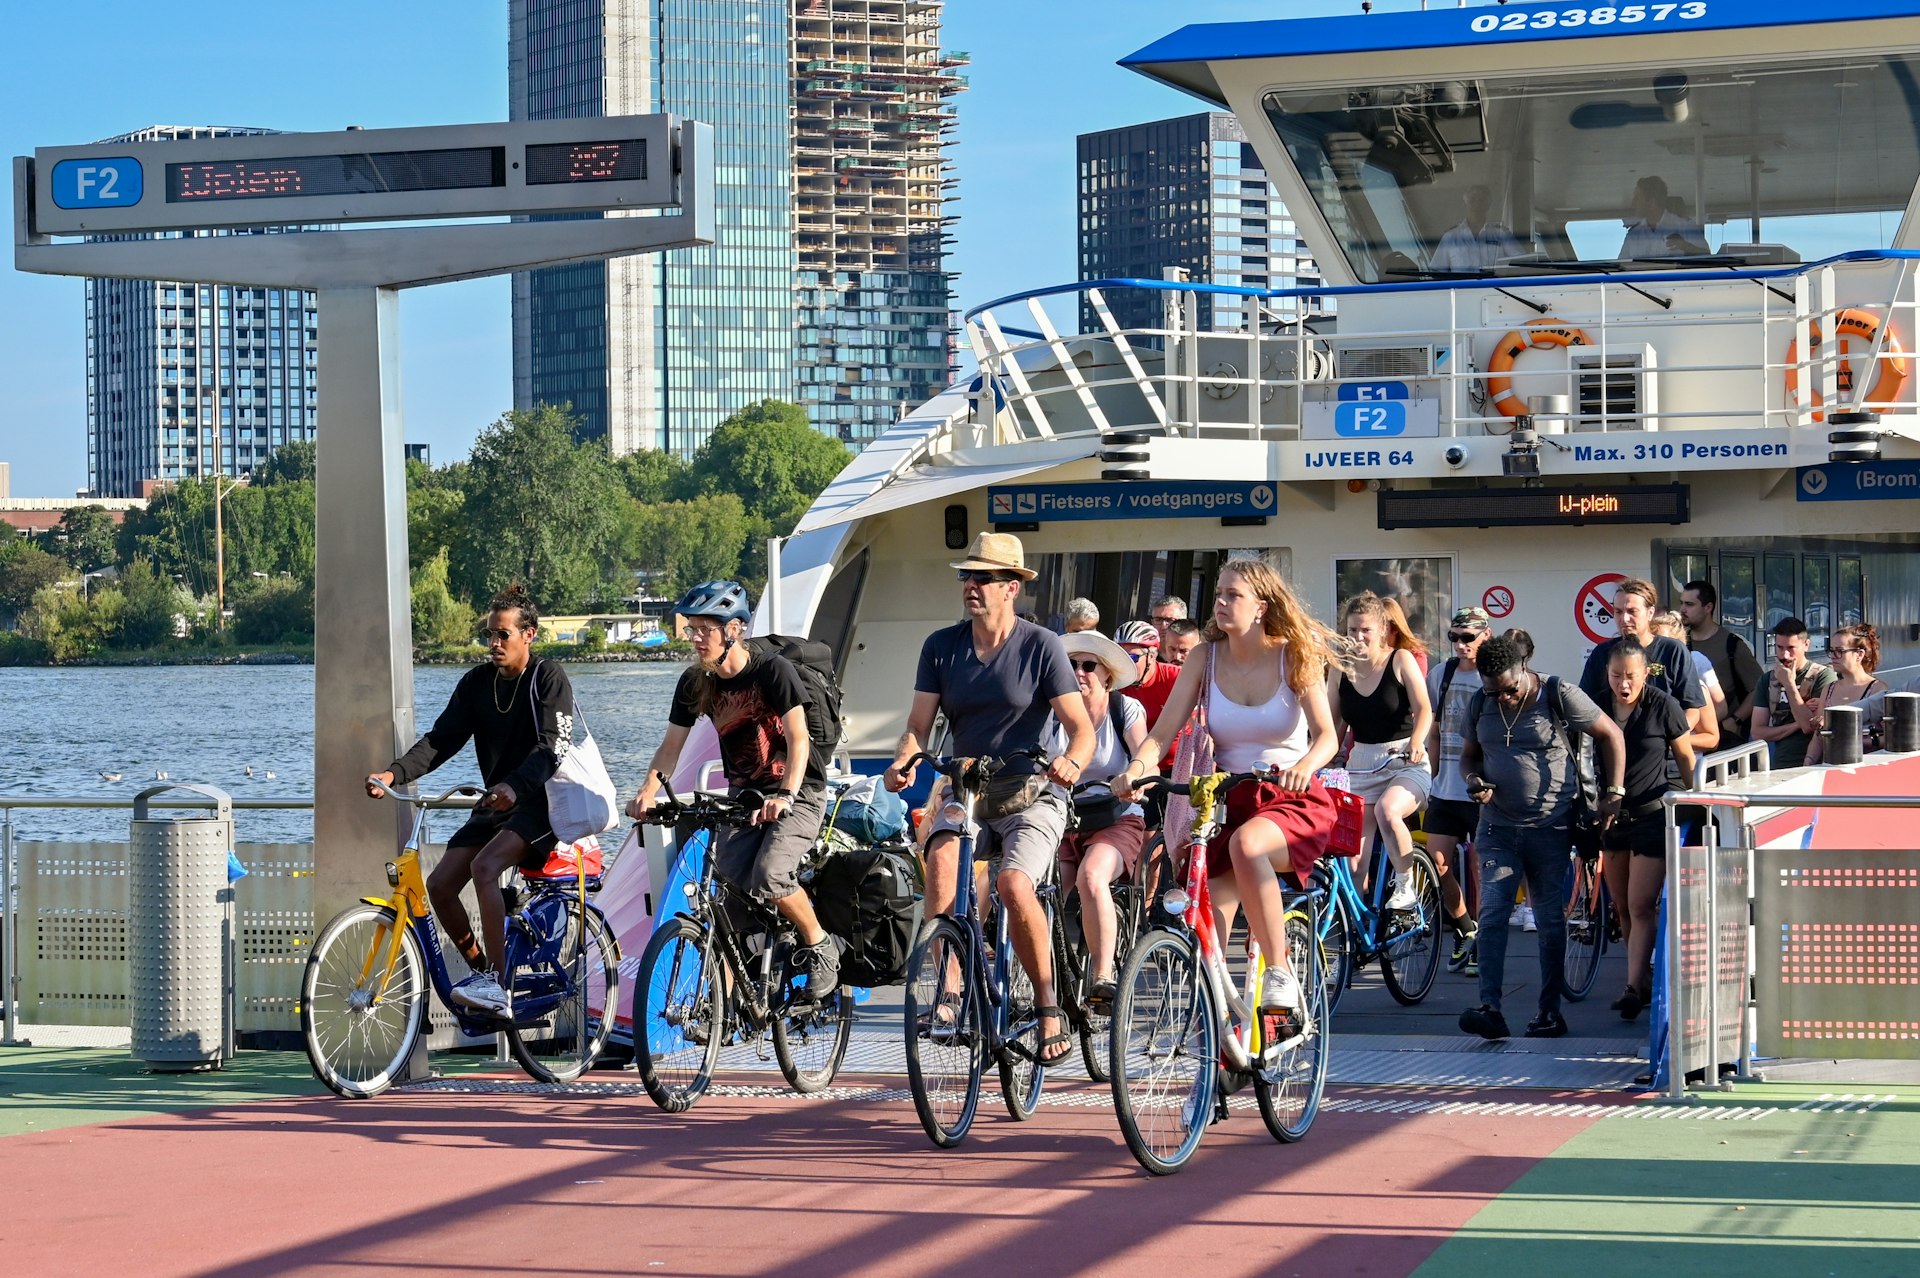 People on bicycles riding off a shuttle ferry service on the waterfront in Amsterdam, Netherlands